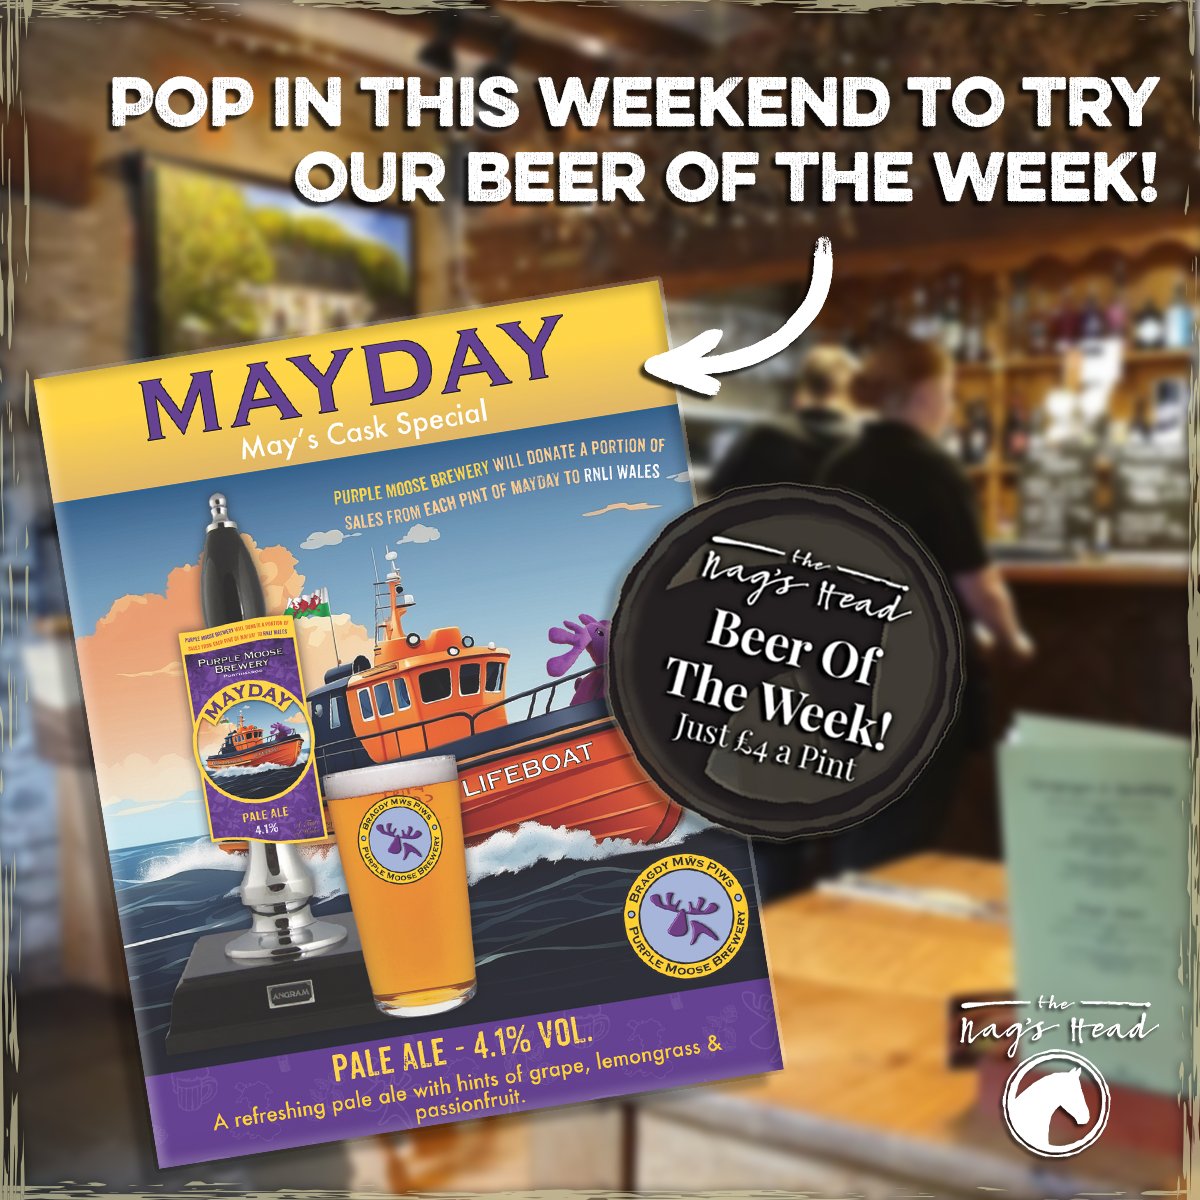 𝗘𝗻𝗷𝗼𝘆 𝗼𝘂𝗿 '𝗕𝗲𝗲𝗿 𝗼𝗳 𝘁𝗵𝗲 𝗪𝗲𝗲𝗸'! - @PurpleMooseBrew #MAYDAY Pale Ale! 💜🍺
Just £4 a pint (with a portion of each sale going to RNLI Wales)! 🚤🛟🏴󠁧󠁢󠁷󠁬󠁳󠁿
Pop in this weekend to enjoy a pint 😄🍻

#BeerOfTheWeek #RNLI #PurpleMoose #LocalBrewery #LocalAle #WelshBrewery